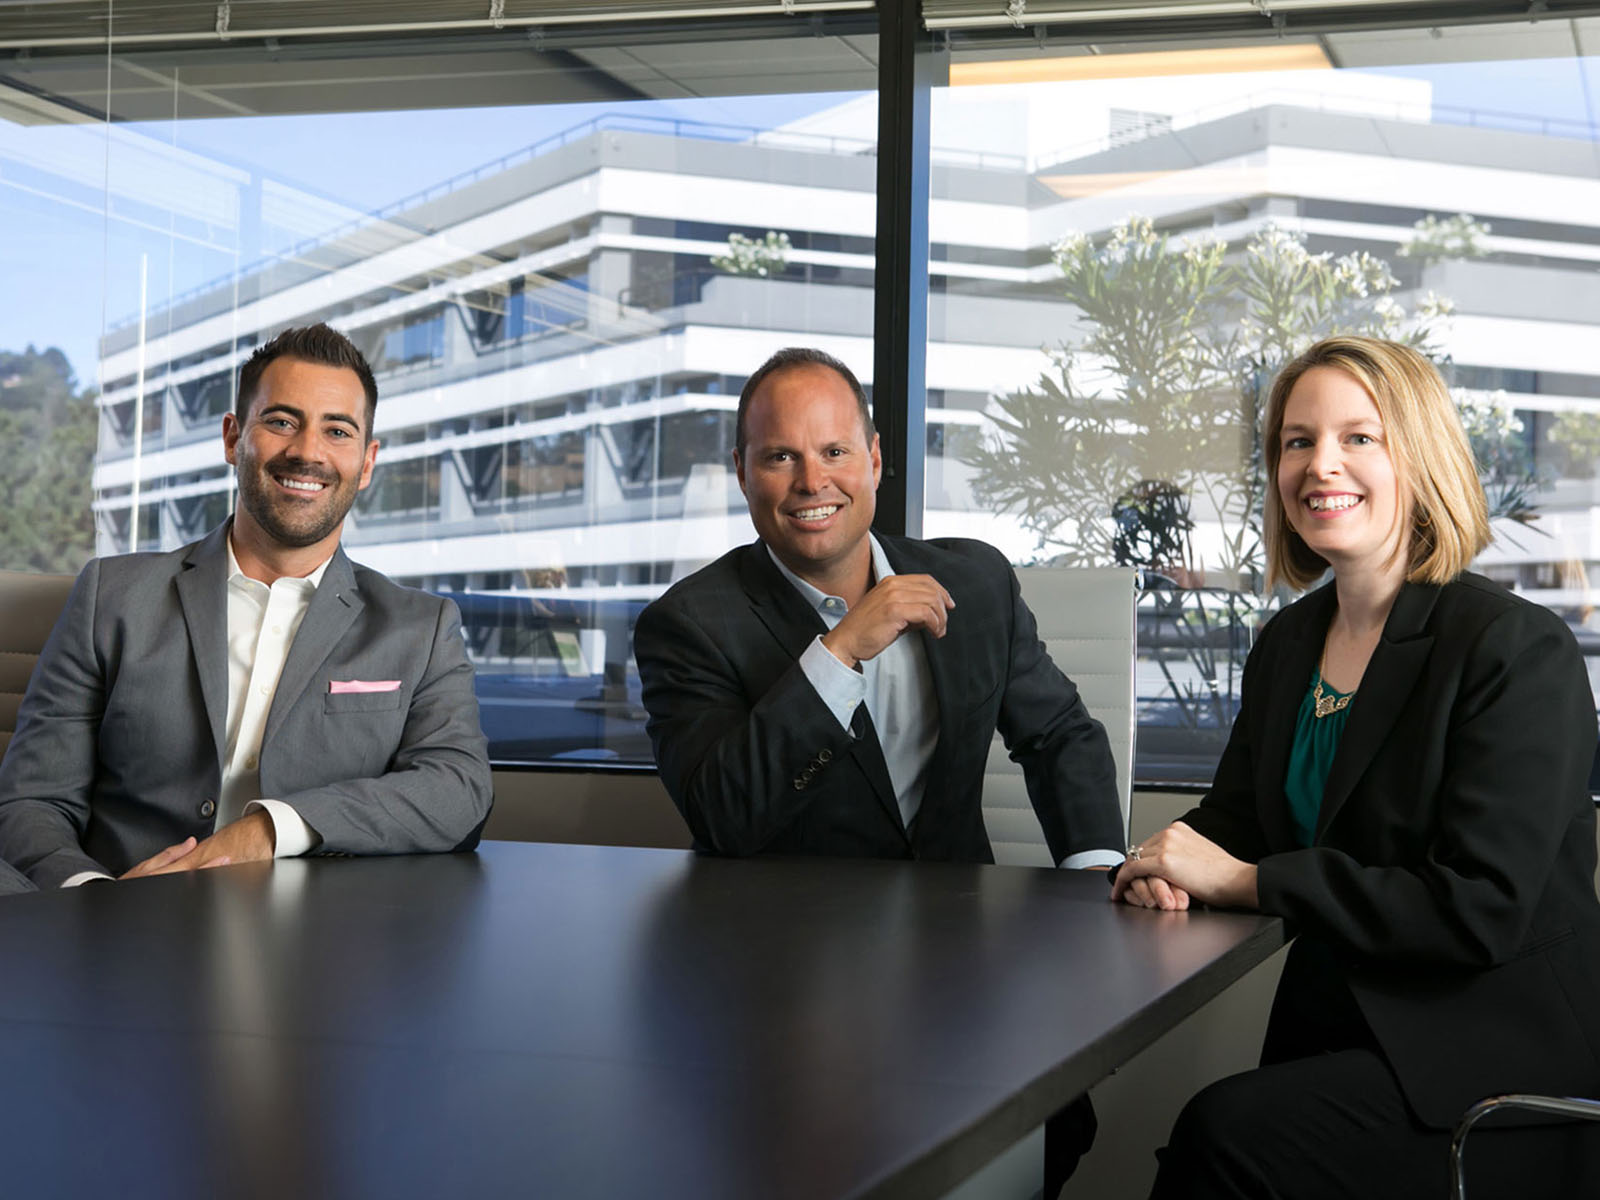 BFIC Partners - Mike Frazier - Meredith Rosen - Mike Harris - Bedell Frazier Investment Counselling, LLC - Registered Investment Advisor - Investment Management - Financial Planning - Bay Area - Walnut Creek, California